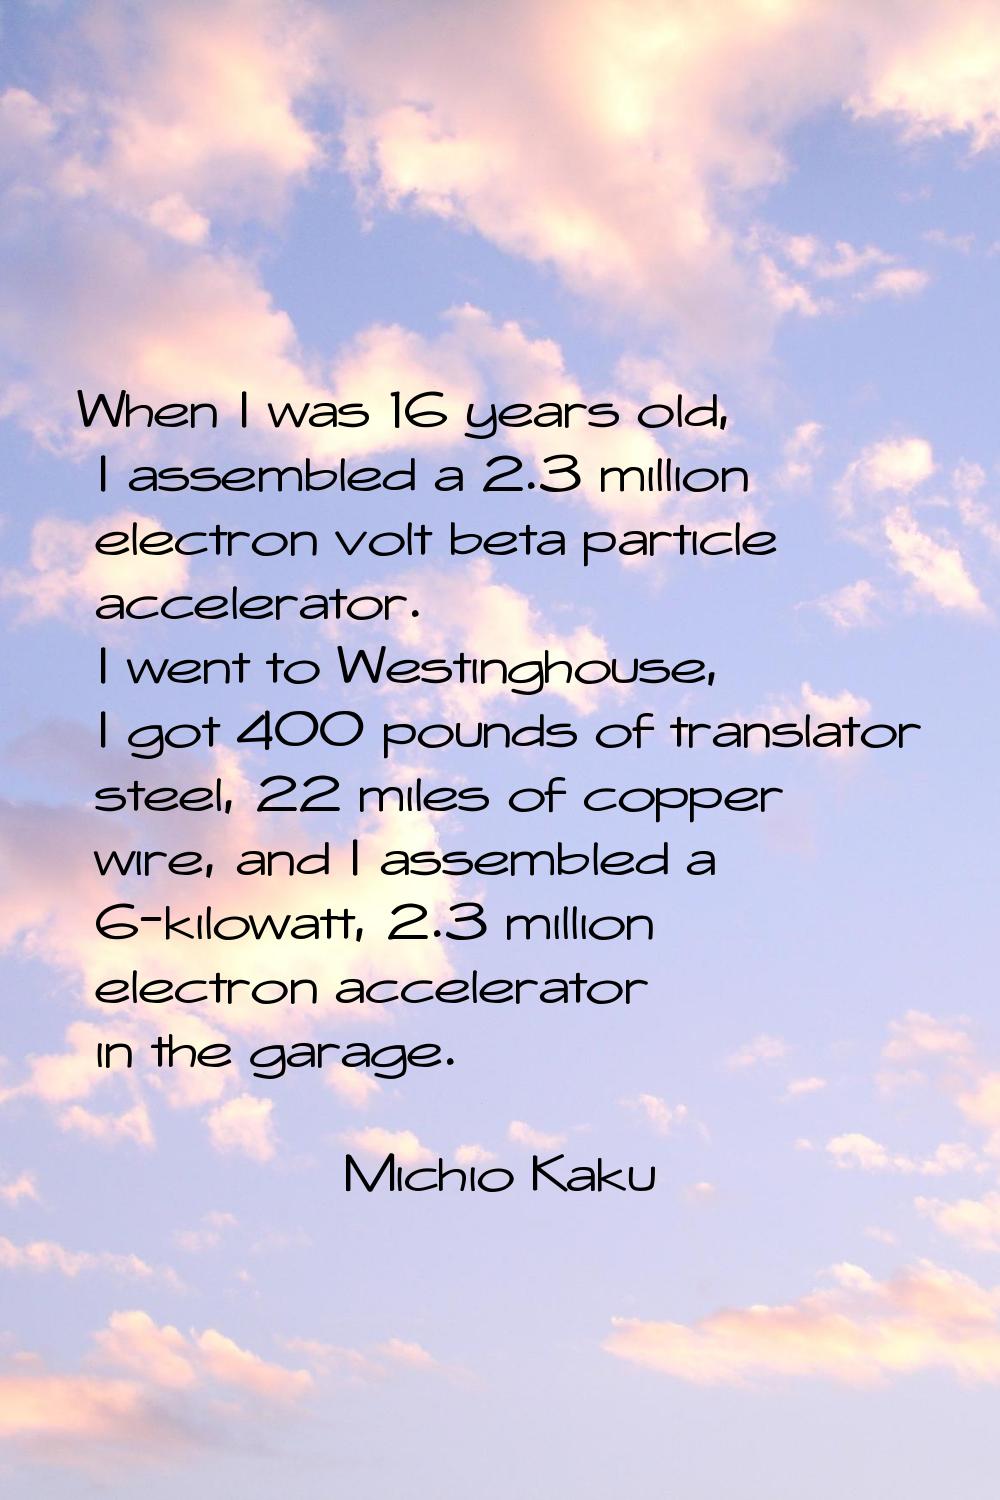 When I was 16 years old, I assembled a 2.3 million electron volt beta particle accelerator. I went 